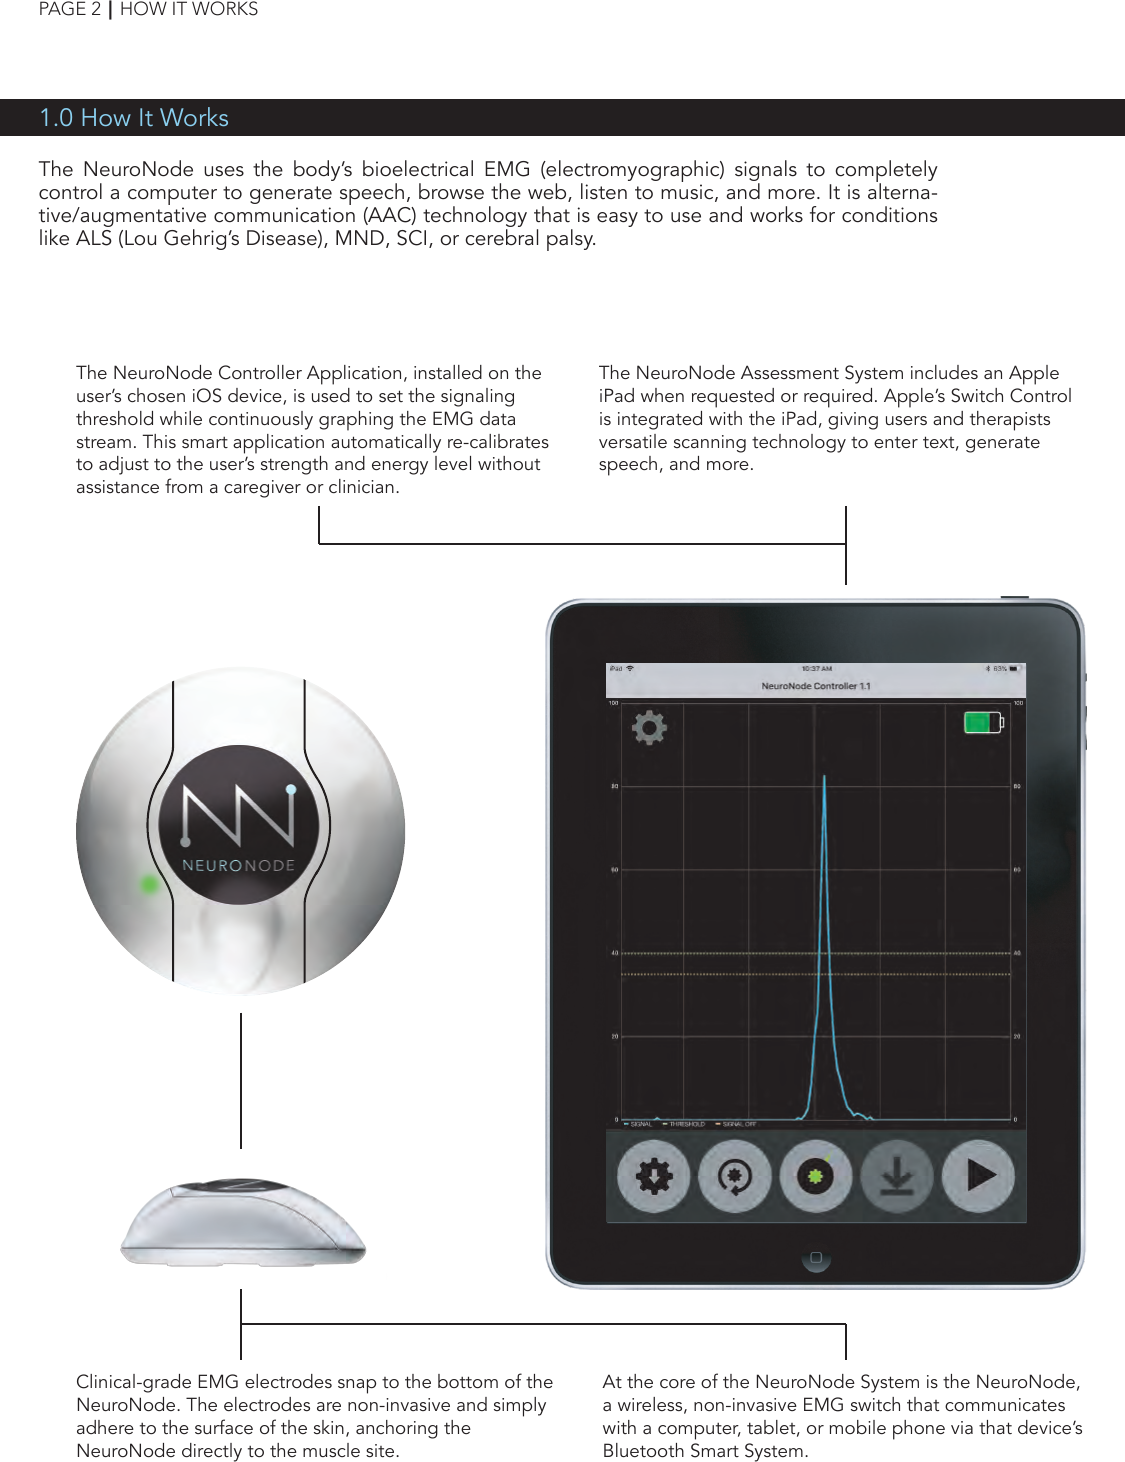 1.0 How It WorksThe NeuroNode uses the body’s bioelectrical EMG (electromyographic) signals to completely control a computer to generate speech, browse the web, listen to music, and more. It is alterna-tive/augmentative communication (AAC) technology that is easy to use and works for conditions like ALS (Lou Gehrig’s Disease), MND, SCI, or cerebral palsy.The NeuroNode Controller Application, installed on the user’s chosen iOS device, is used to set the signaling threshold while continuously graphing the EMG data stream. This smart application automatically re-calibrates to adjust to the user’s strength and energy level without assistance from a caregiver or clinician.Clinical-grade EMG electrodes snap to the bottom of the NeuroNode. The electrodes are non-invasive and simply adhere to the surface of the skin, anchoring the NeuroNode directly to the muscle site.At the core of the NeuroNode System is the NeuroNode, a wireless, non-invasive EMG switch that communicates with a computer, tablet, or mobile phone via that device’s Bluetooth Smart System.The NeuroNode Assessment System includes an Apple iPad when requested or required. Apple’s Switch Control is integrated with the iPad, giving users and therapists versatile scanning technology to enter text, generate speech, and more.PAGE 2┃HOW IT WORKS